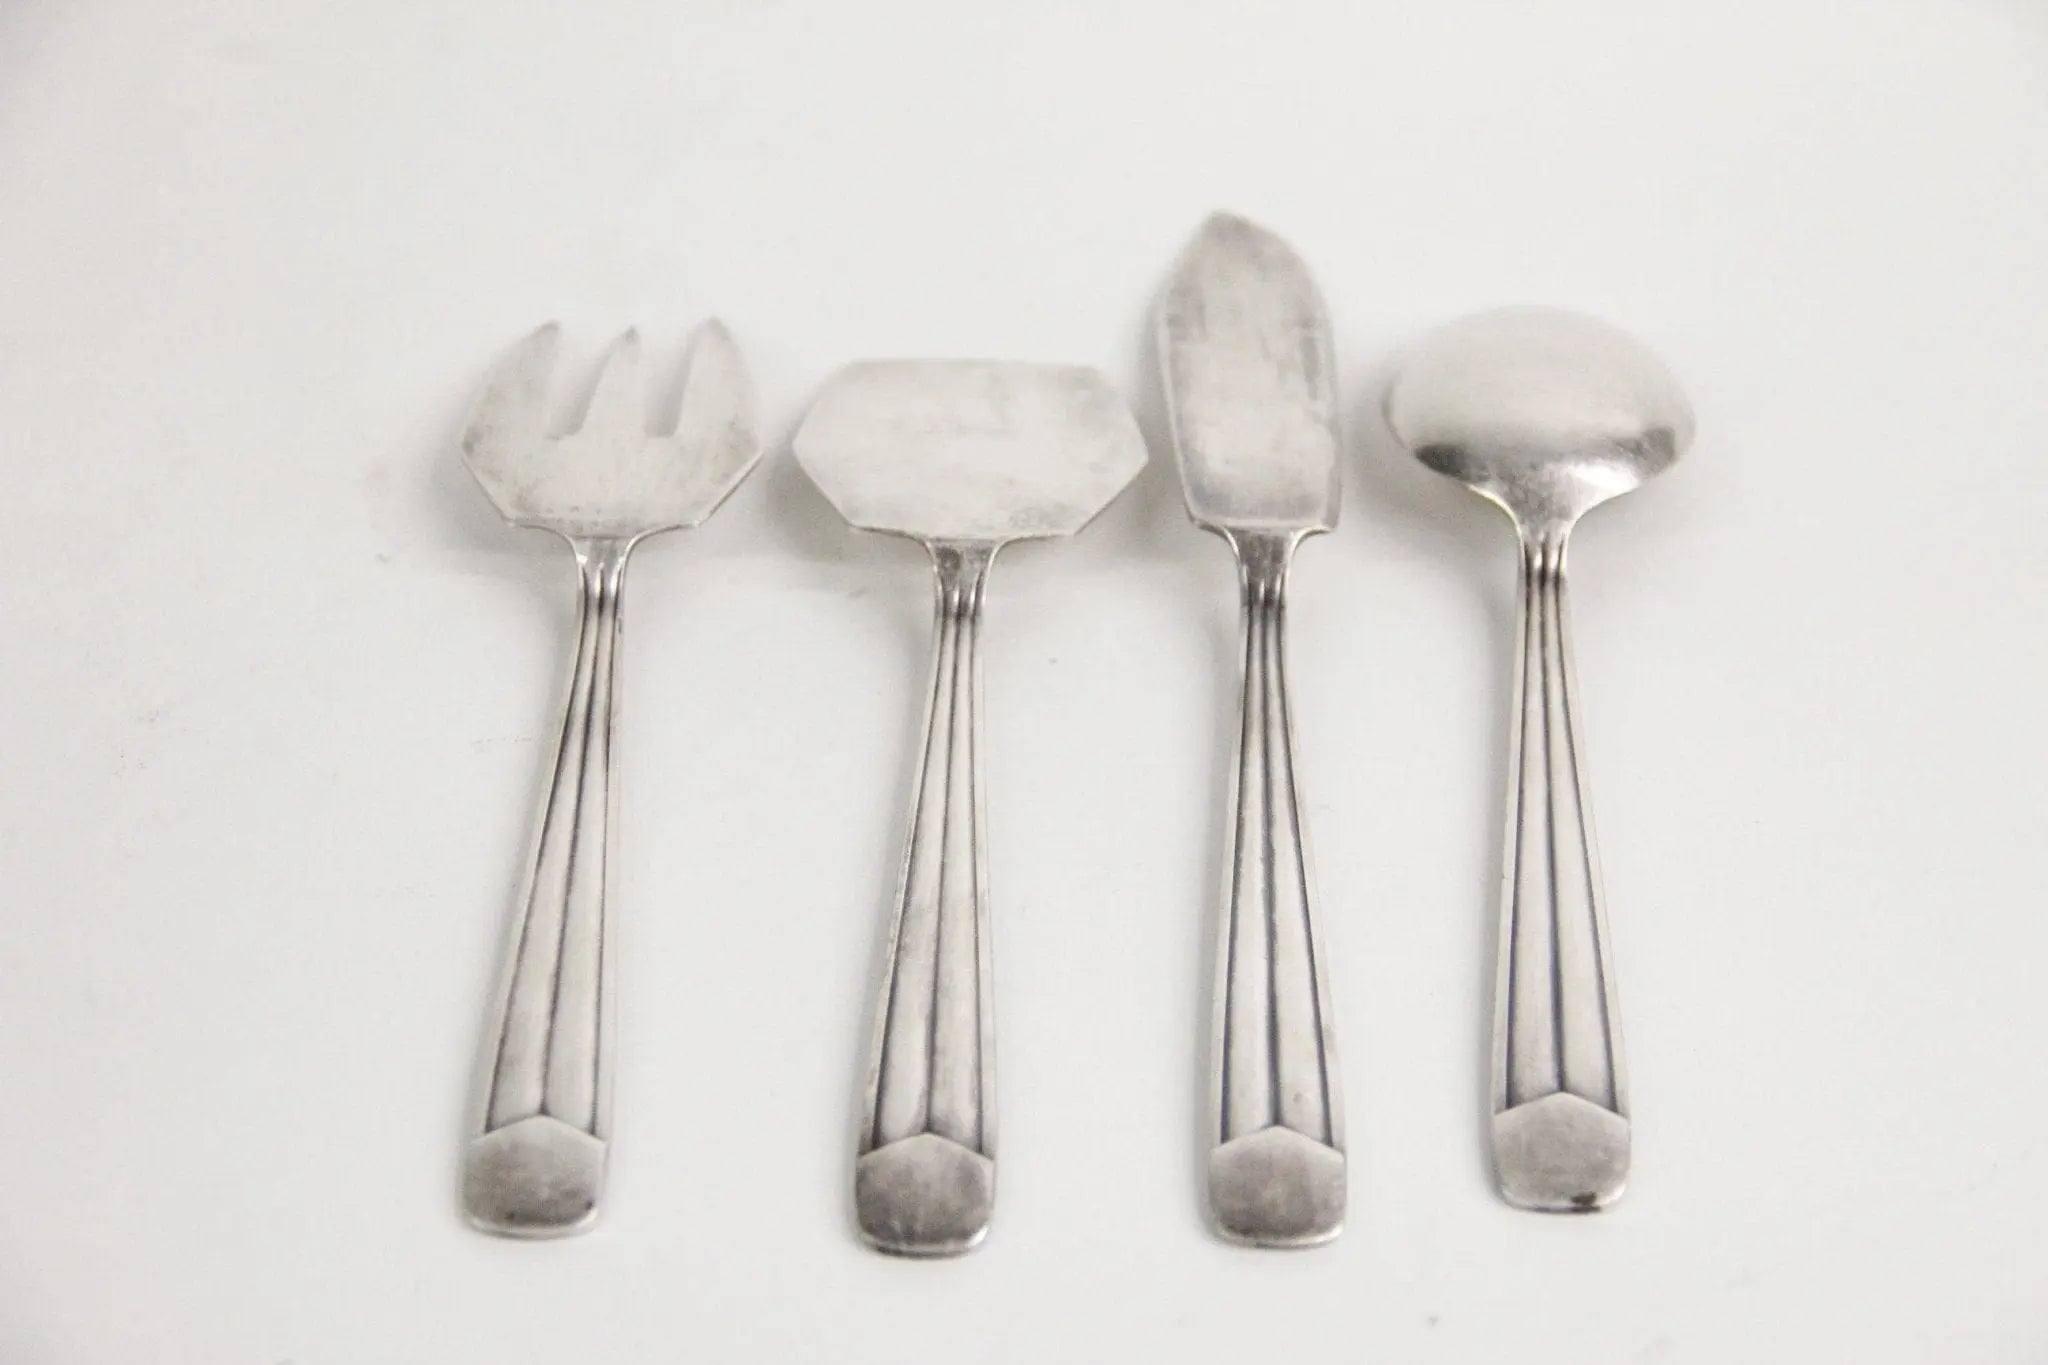 Vintage French Silver Flatware | Hors D'oeuvres Set  Debra Hall Lifestyle